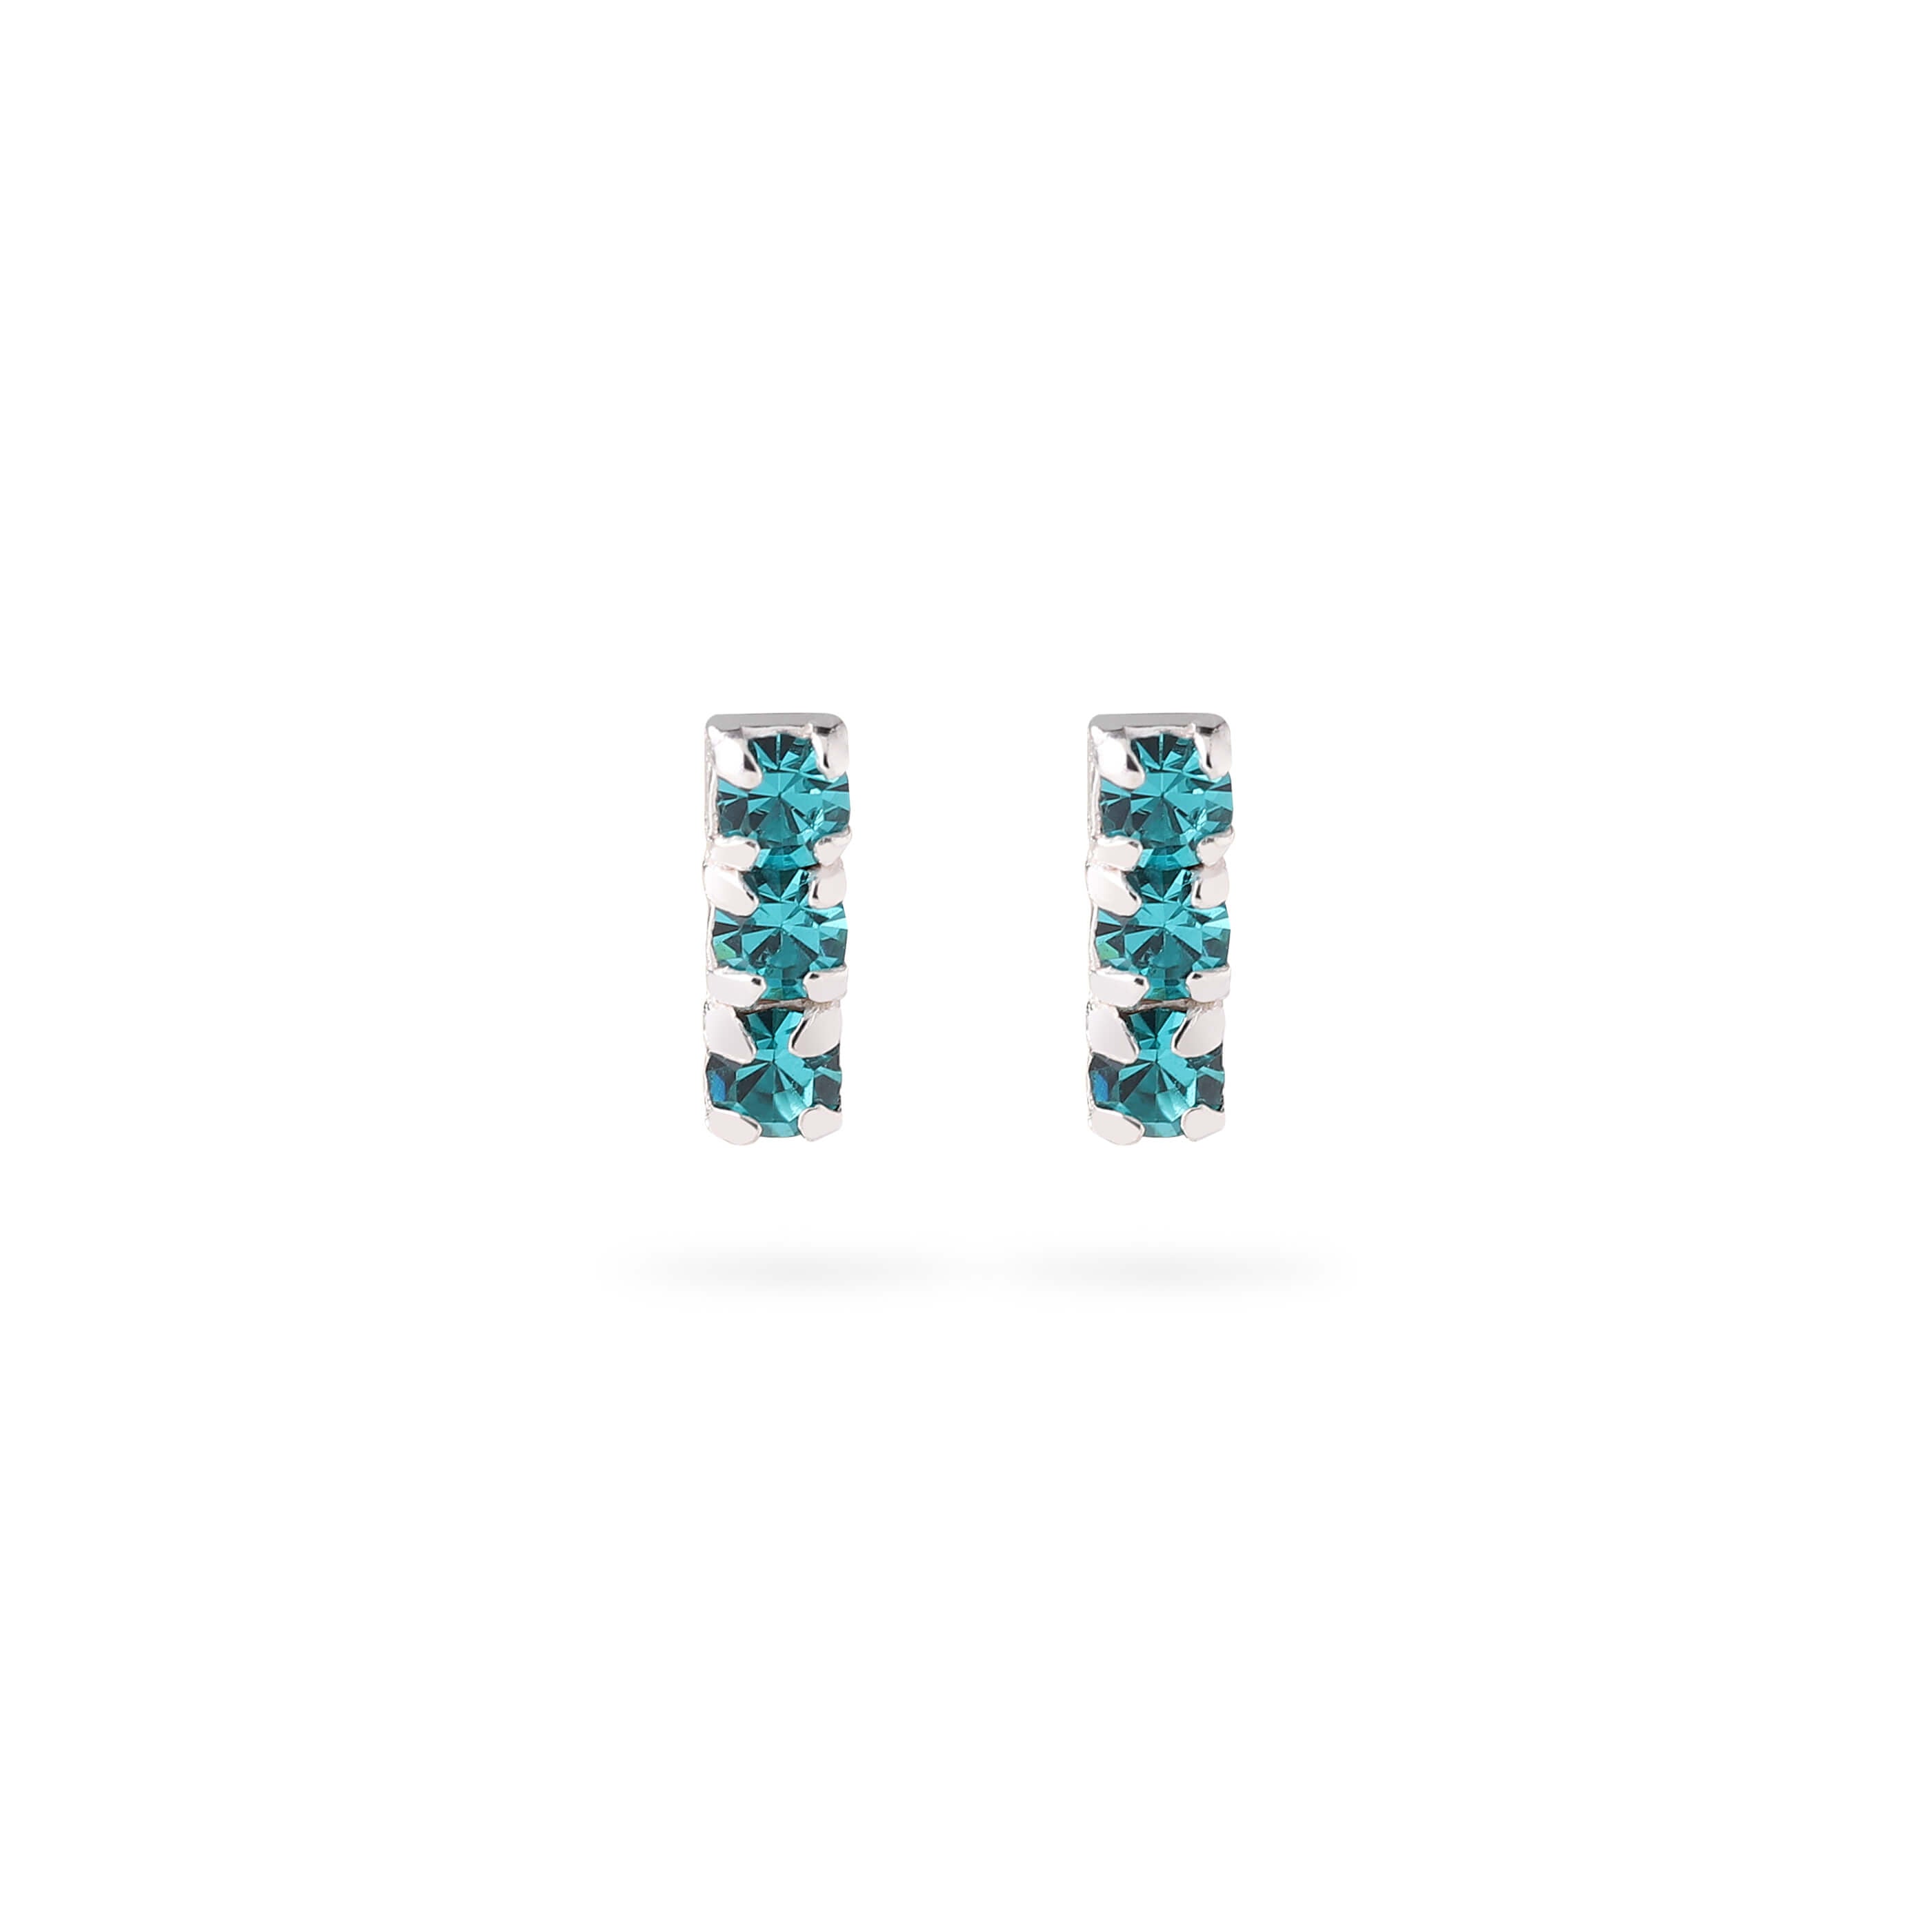 front view 925 silver ear stud with blue zirconia stones